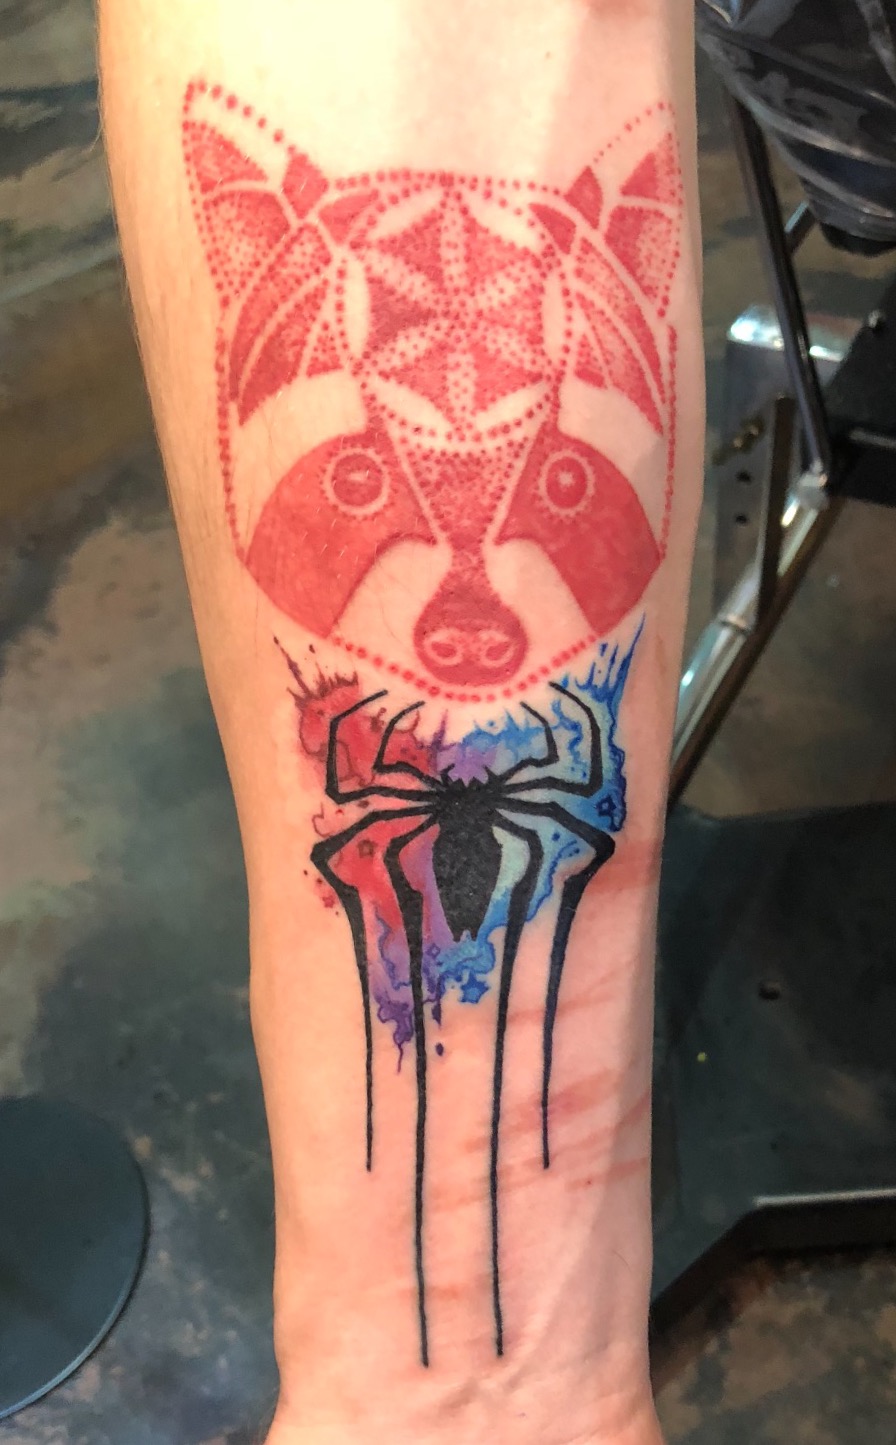 Spiderman tattoo, water color tattoo, water color Spiderman logo tattoo, Spiderman logo, Johnny calico, color tattoo